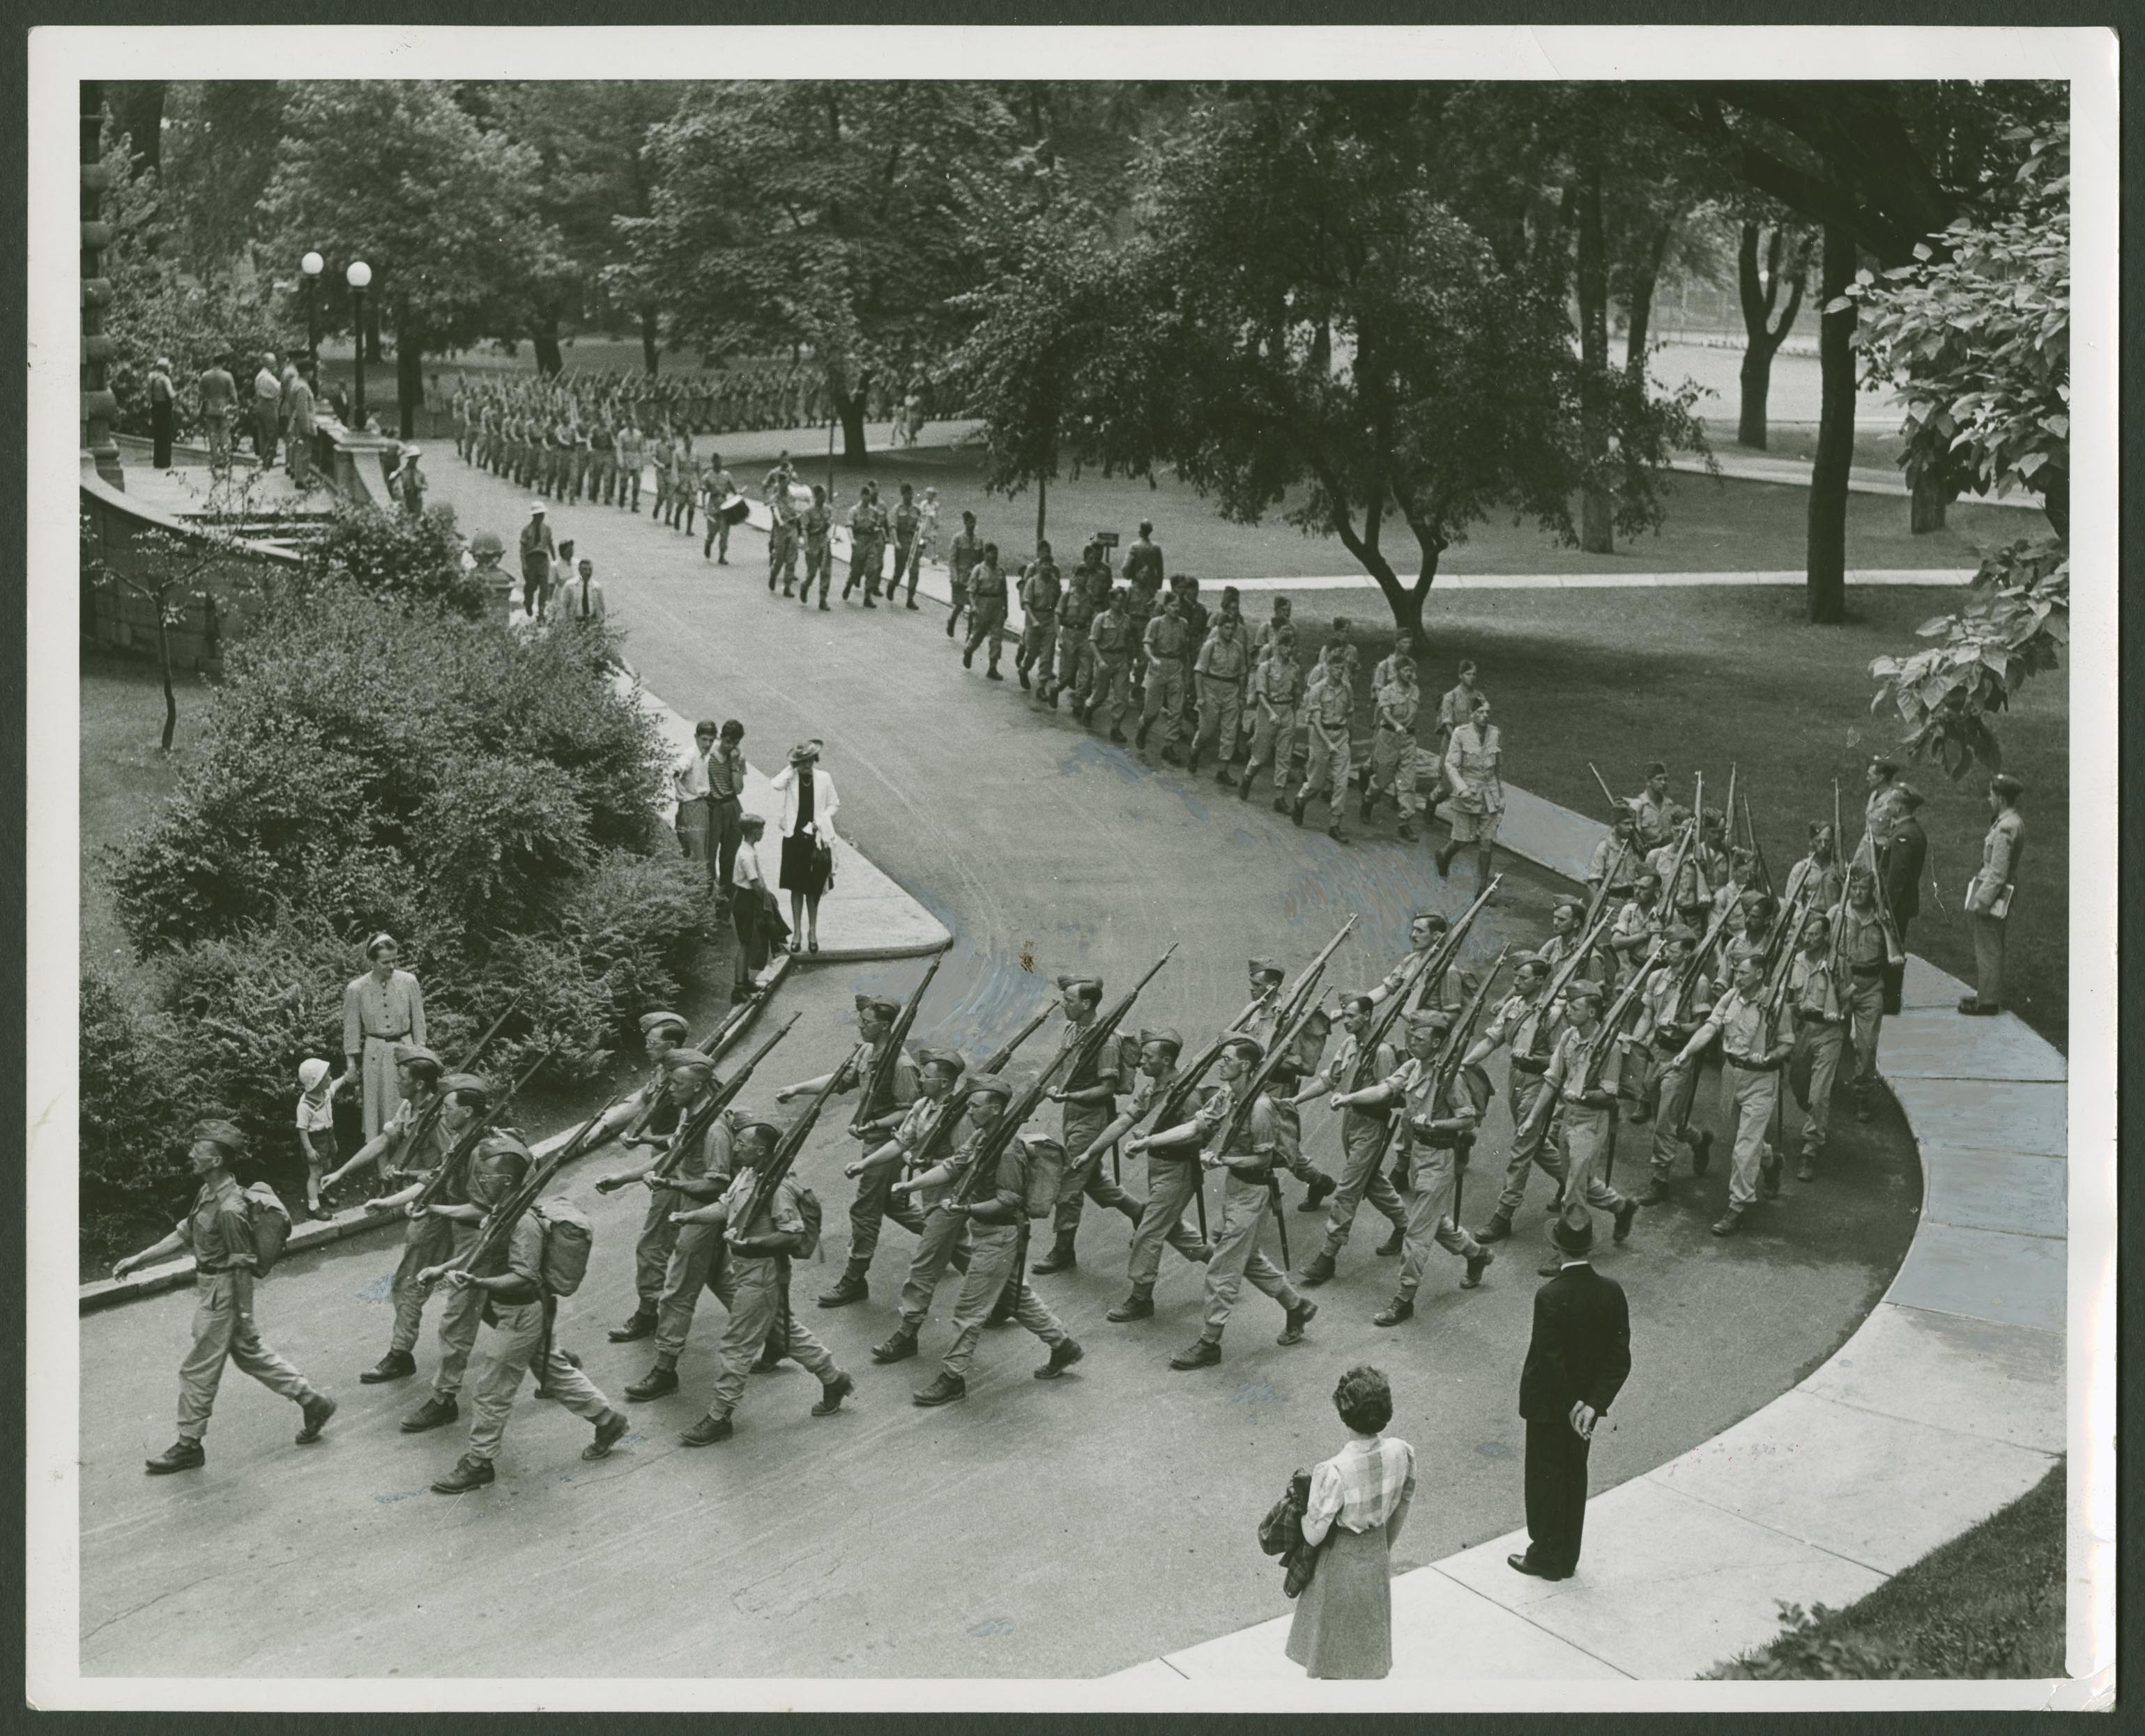 The McGill contingent of the Canadian Officers’ Training Corps parading on lower campus in 1941 (Photo: McGill University Archives)